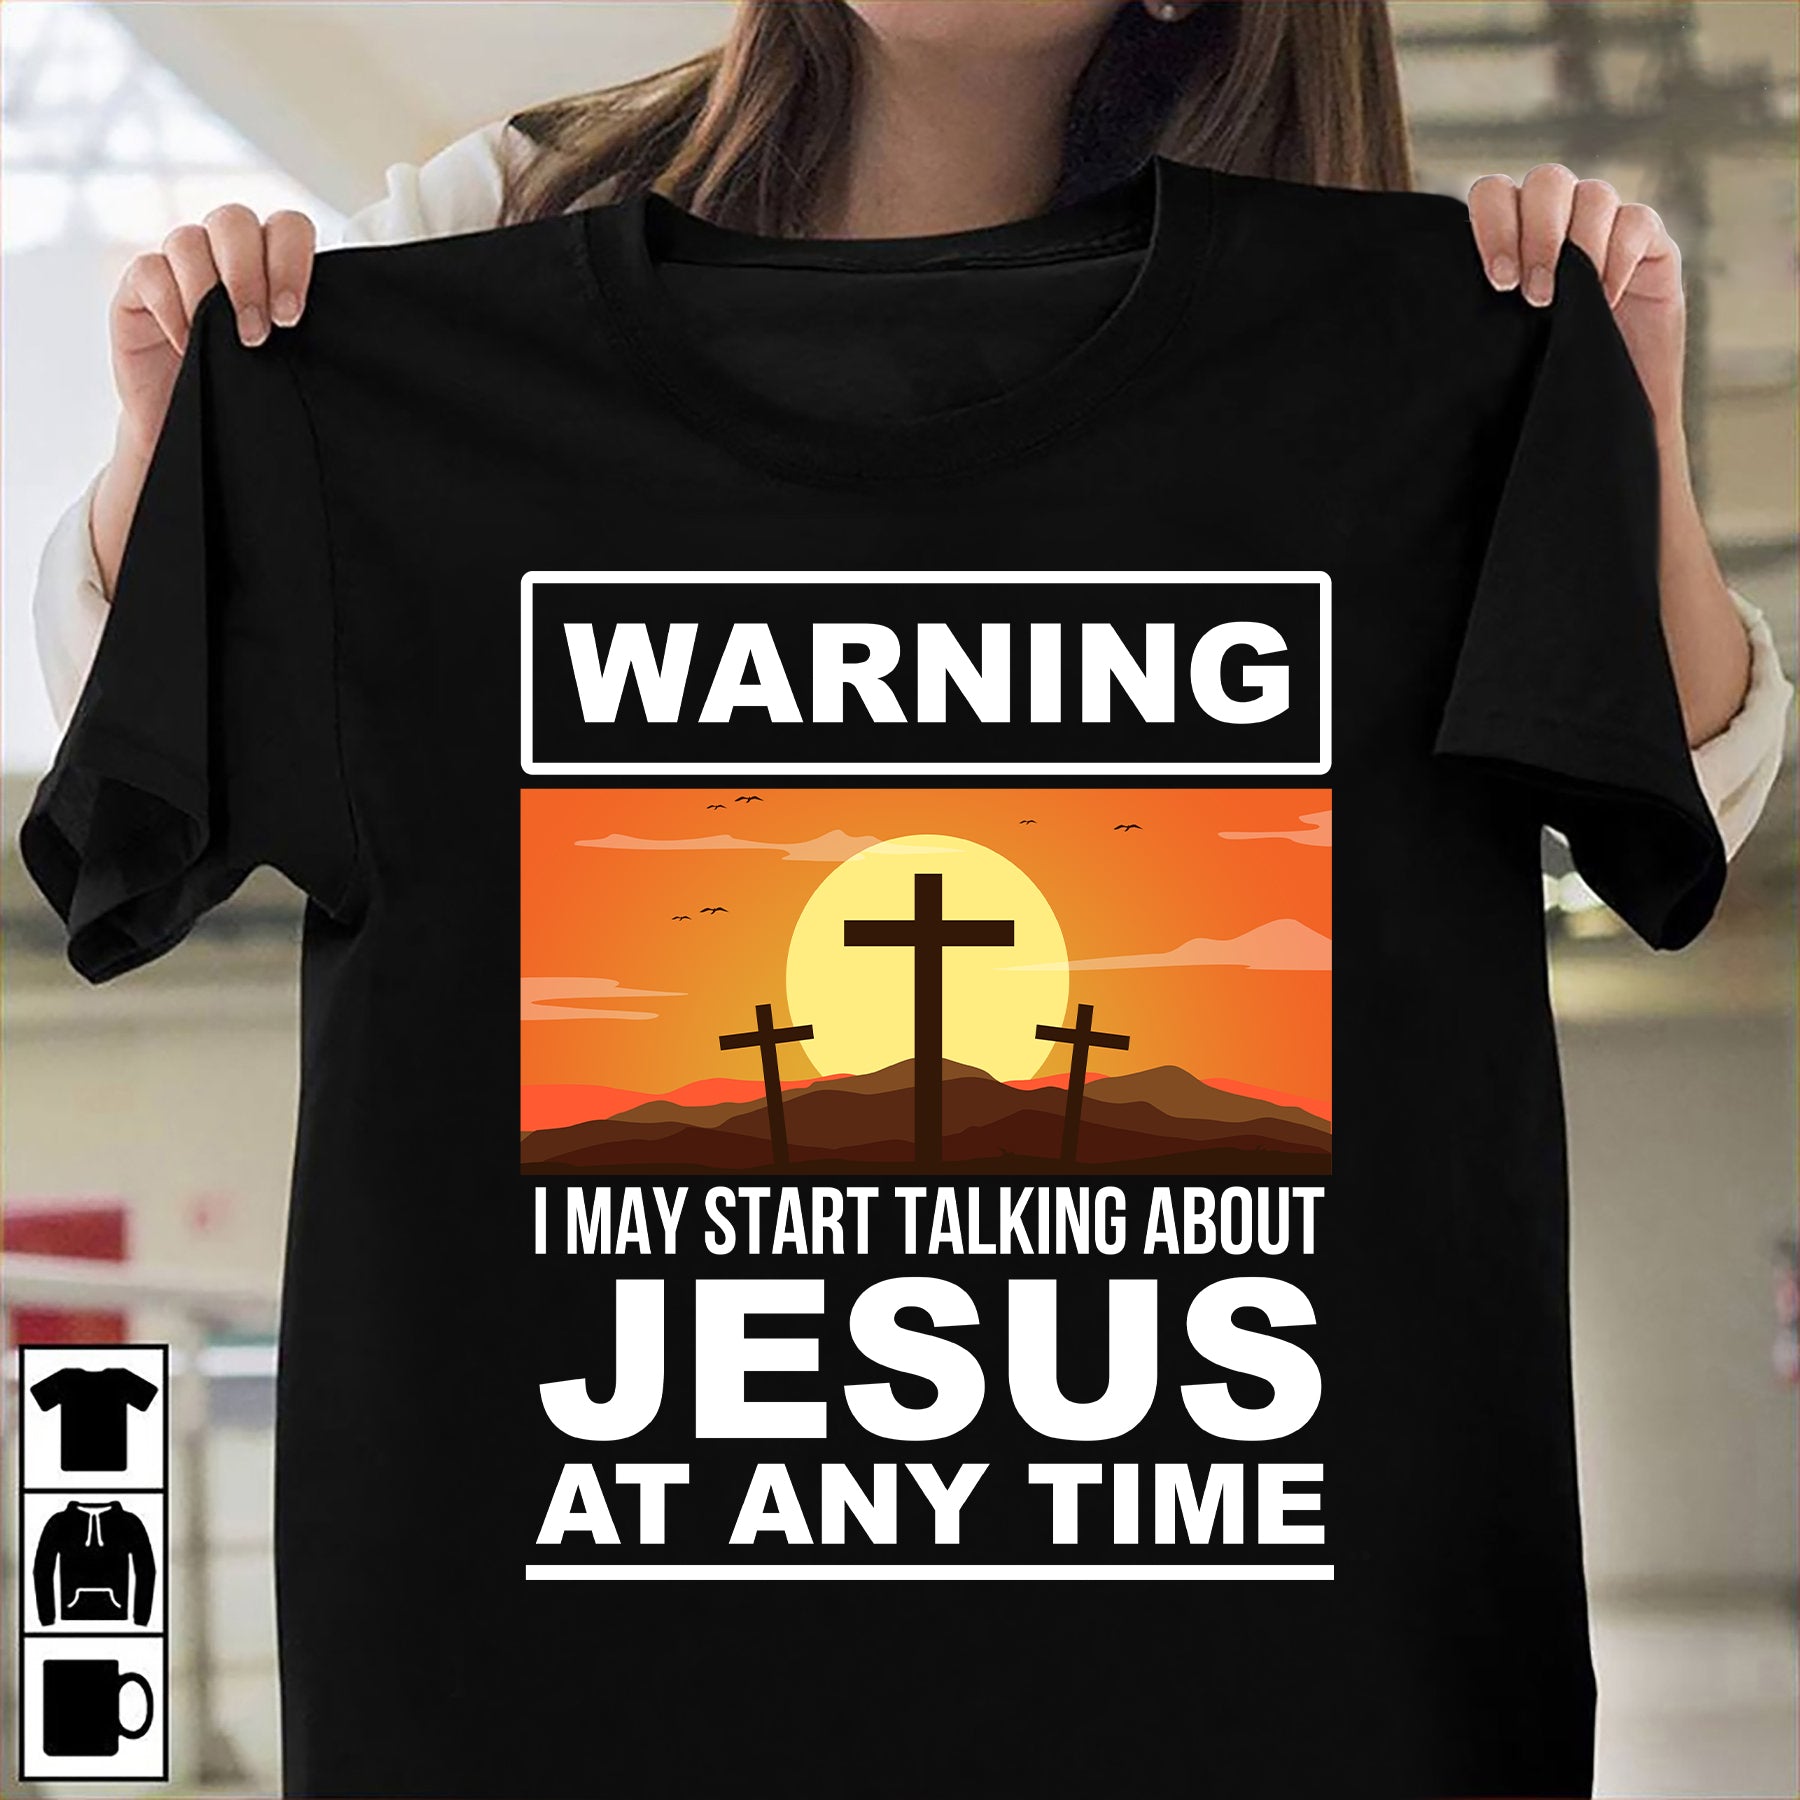 Wooden cross, Sun drawing, I may start talking about Jesus at any time – Jesus T Shirt